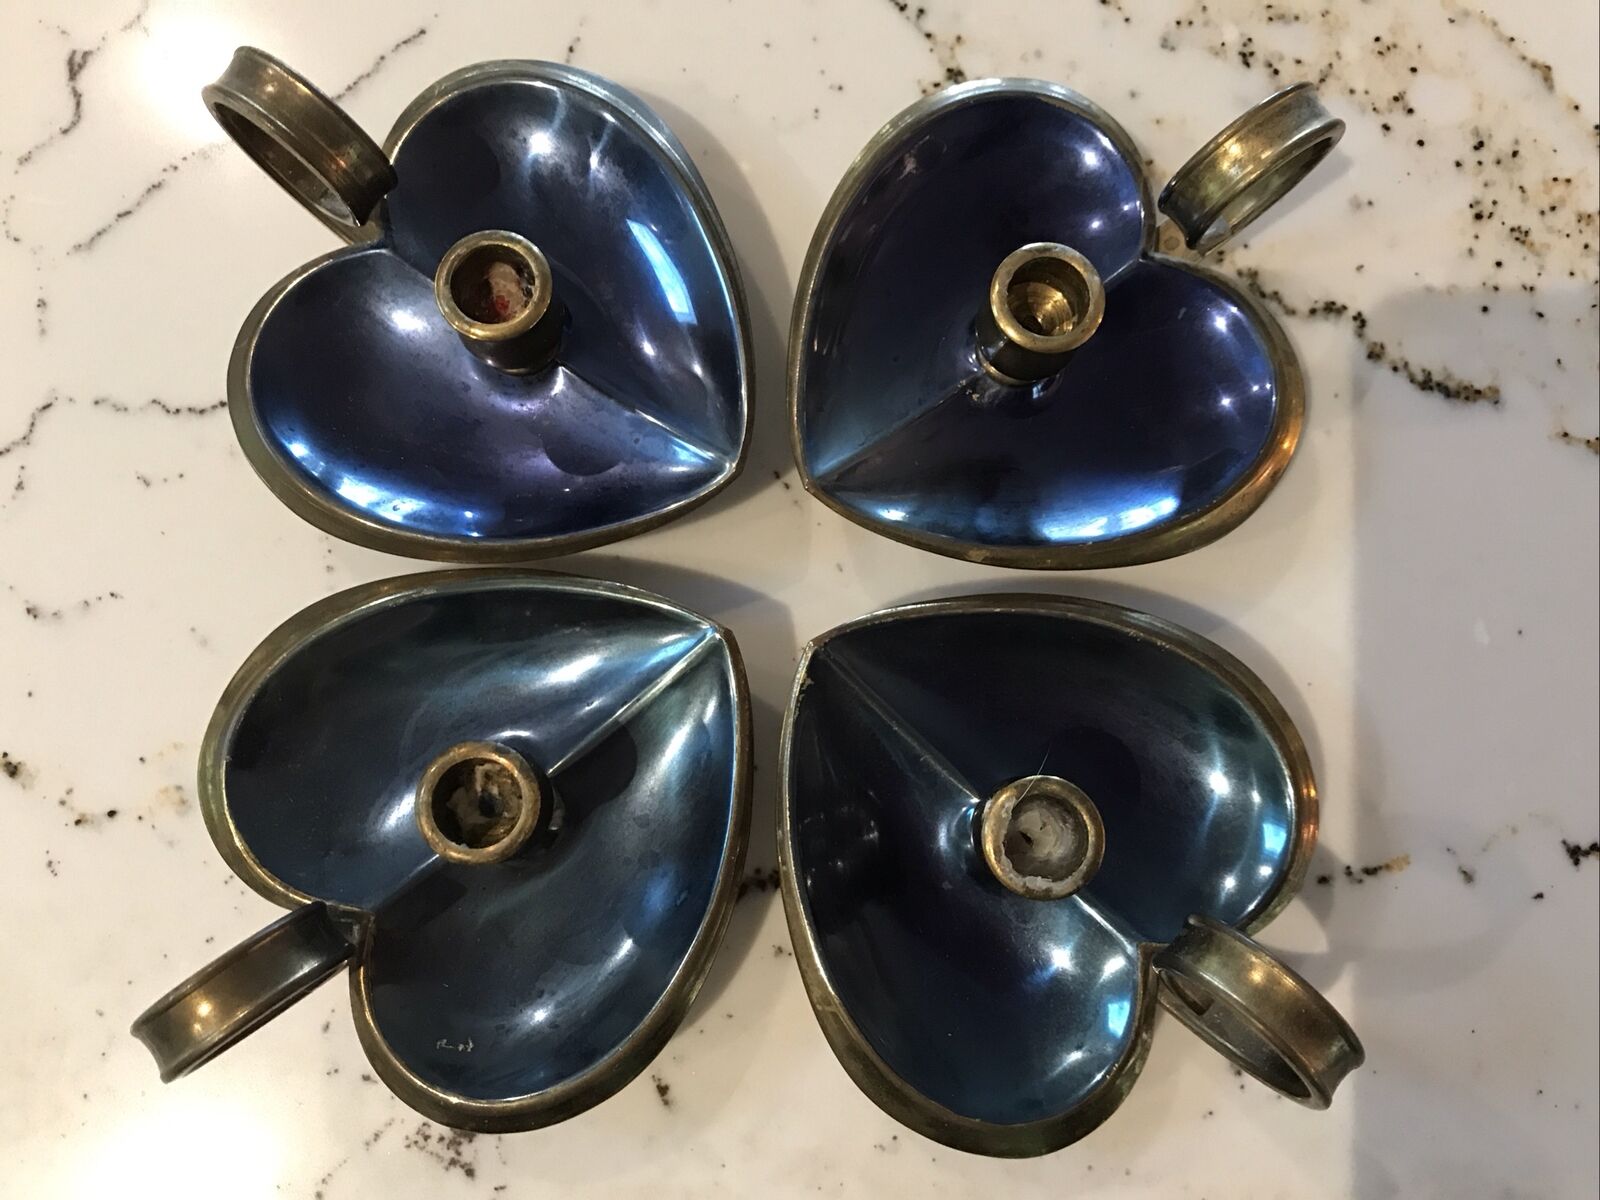 VTG Heart Shaped Chamber Candles Solid Brass Blue (4)  1970s